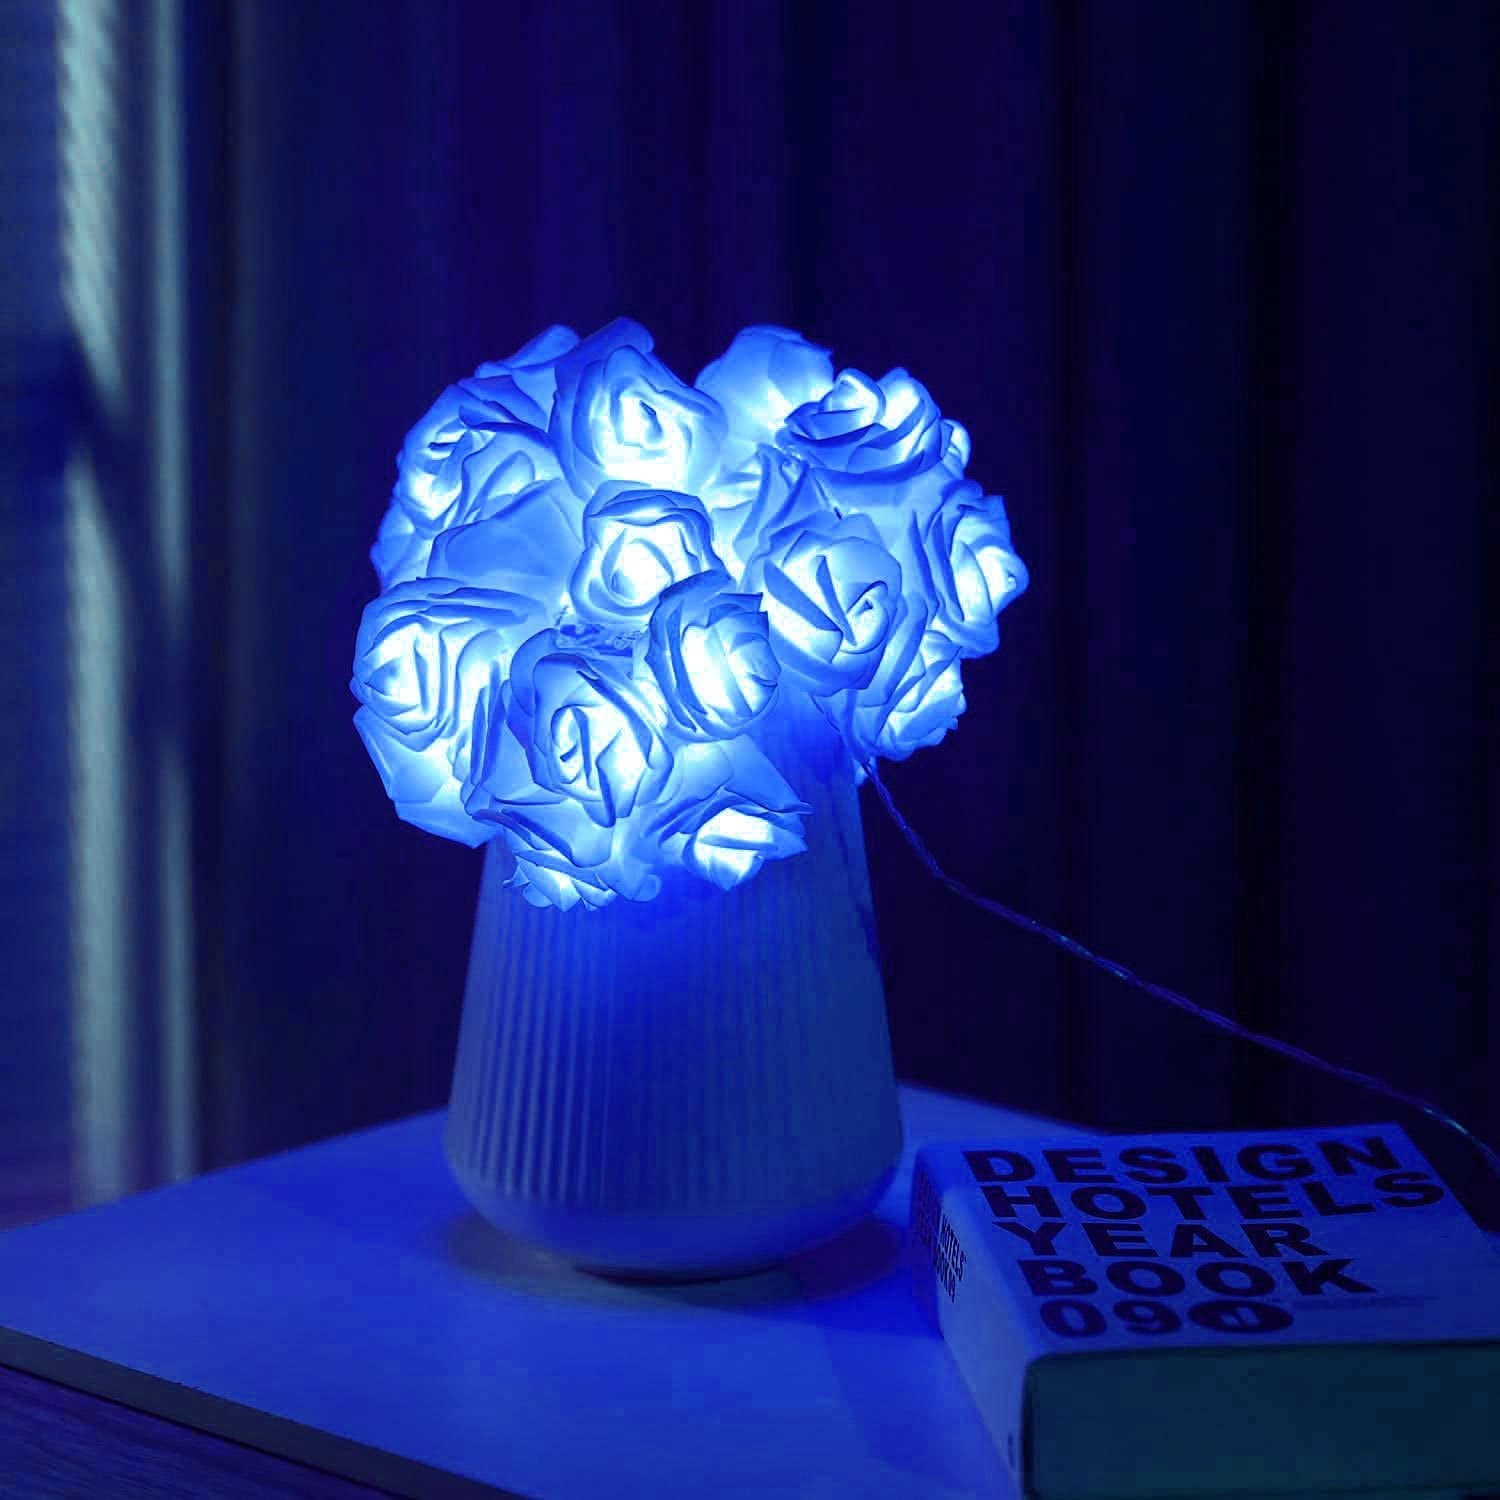 vase with blue light up rose lights gathered in it